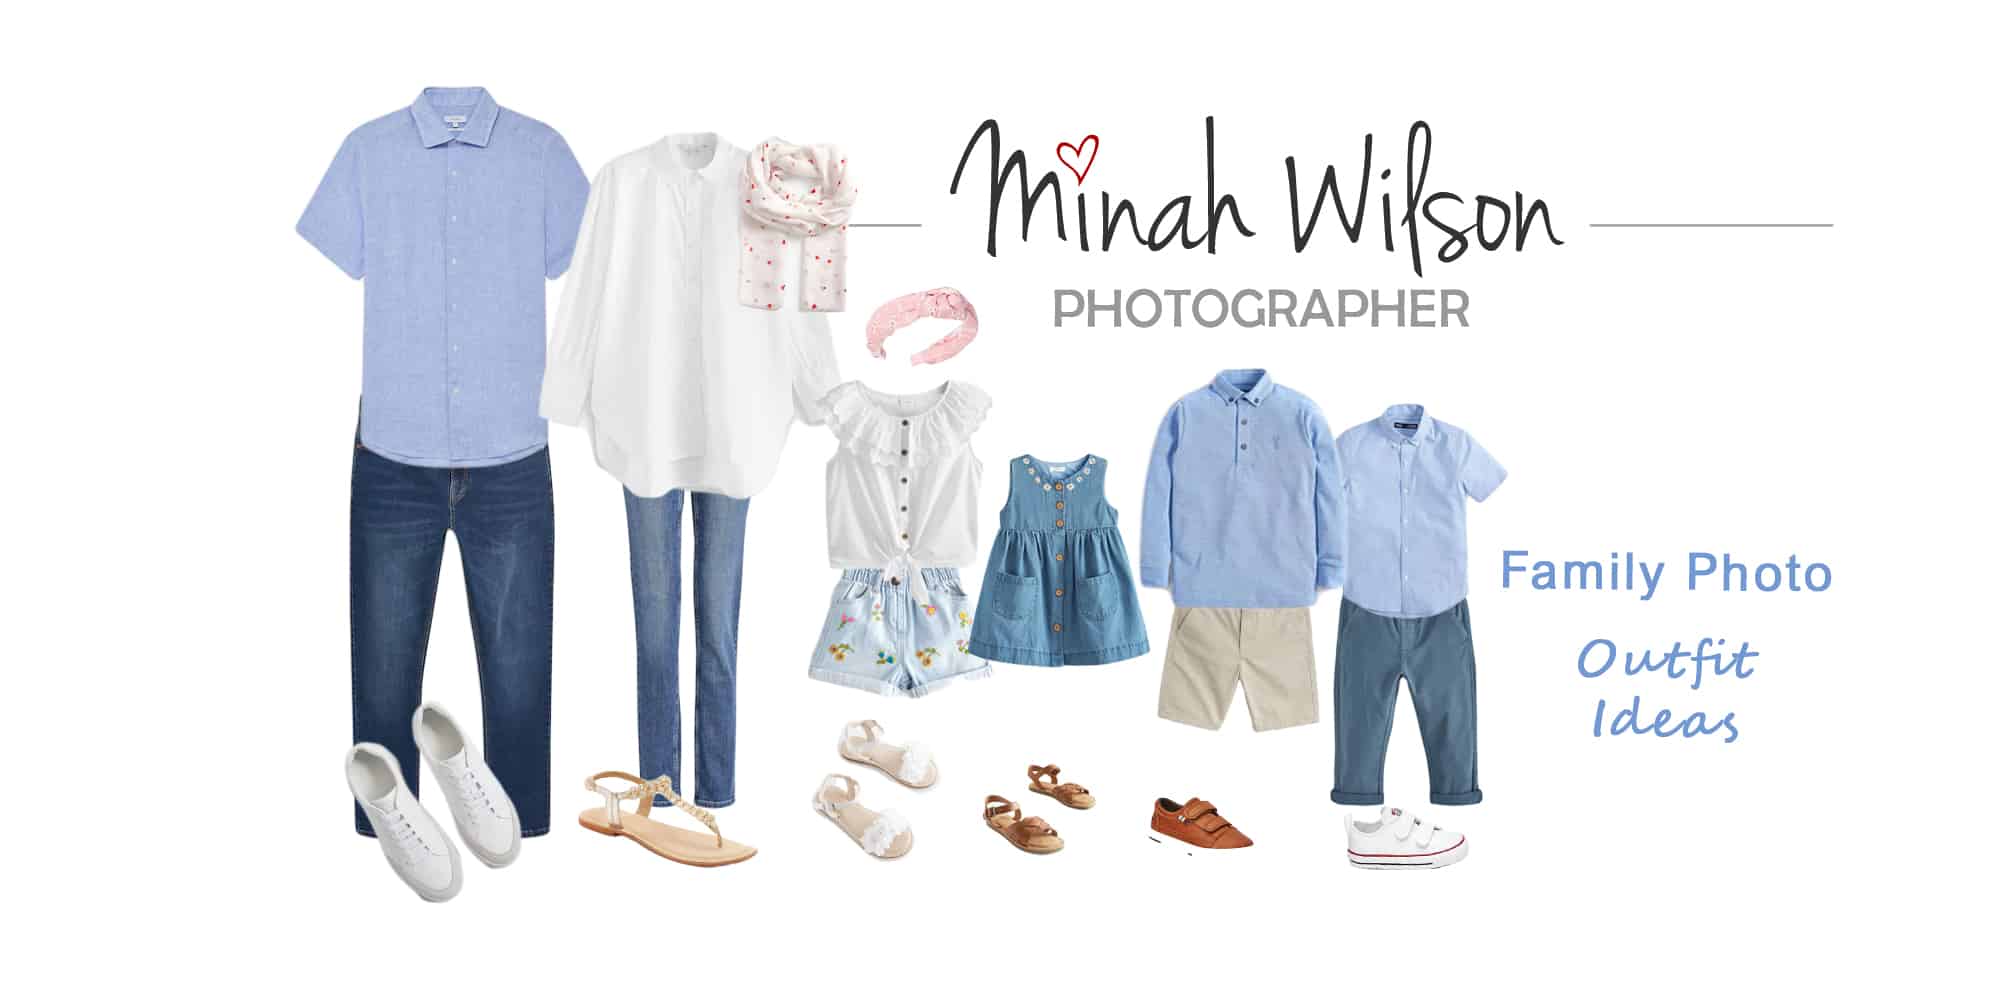 Mood board of clothes for a family photo shoot - what to wear in light blue colours and cream/beige for a spring summer photo session